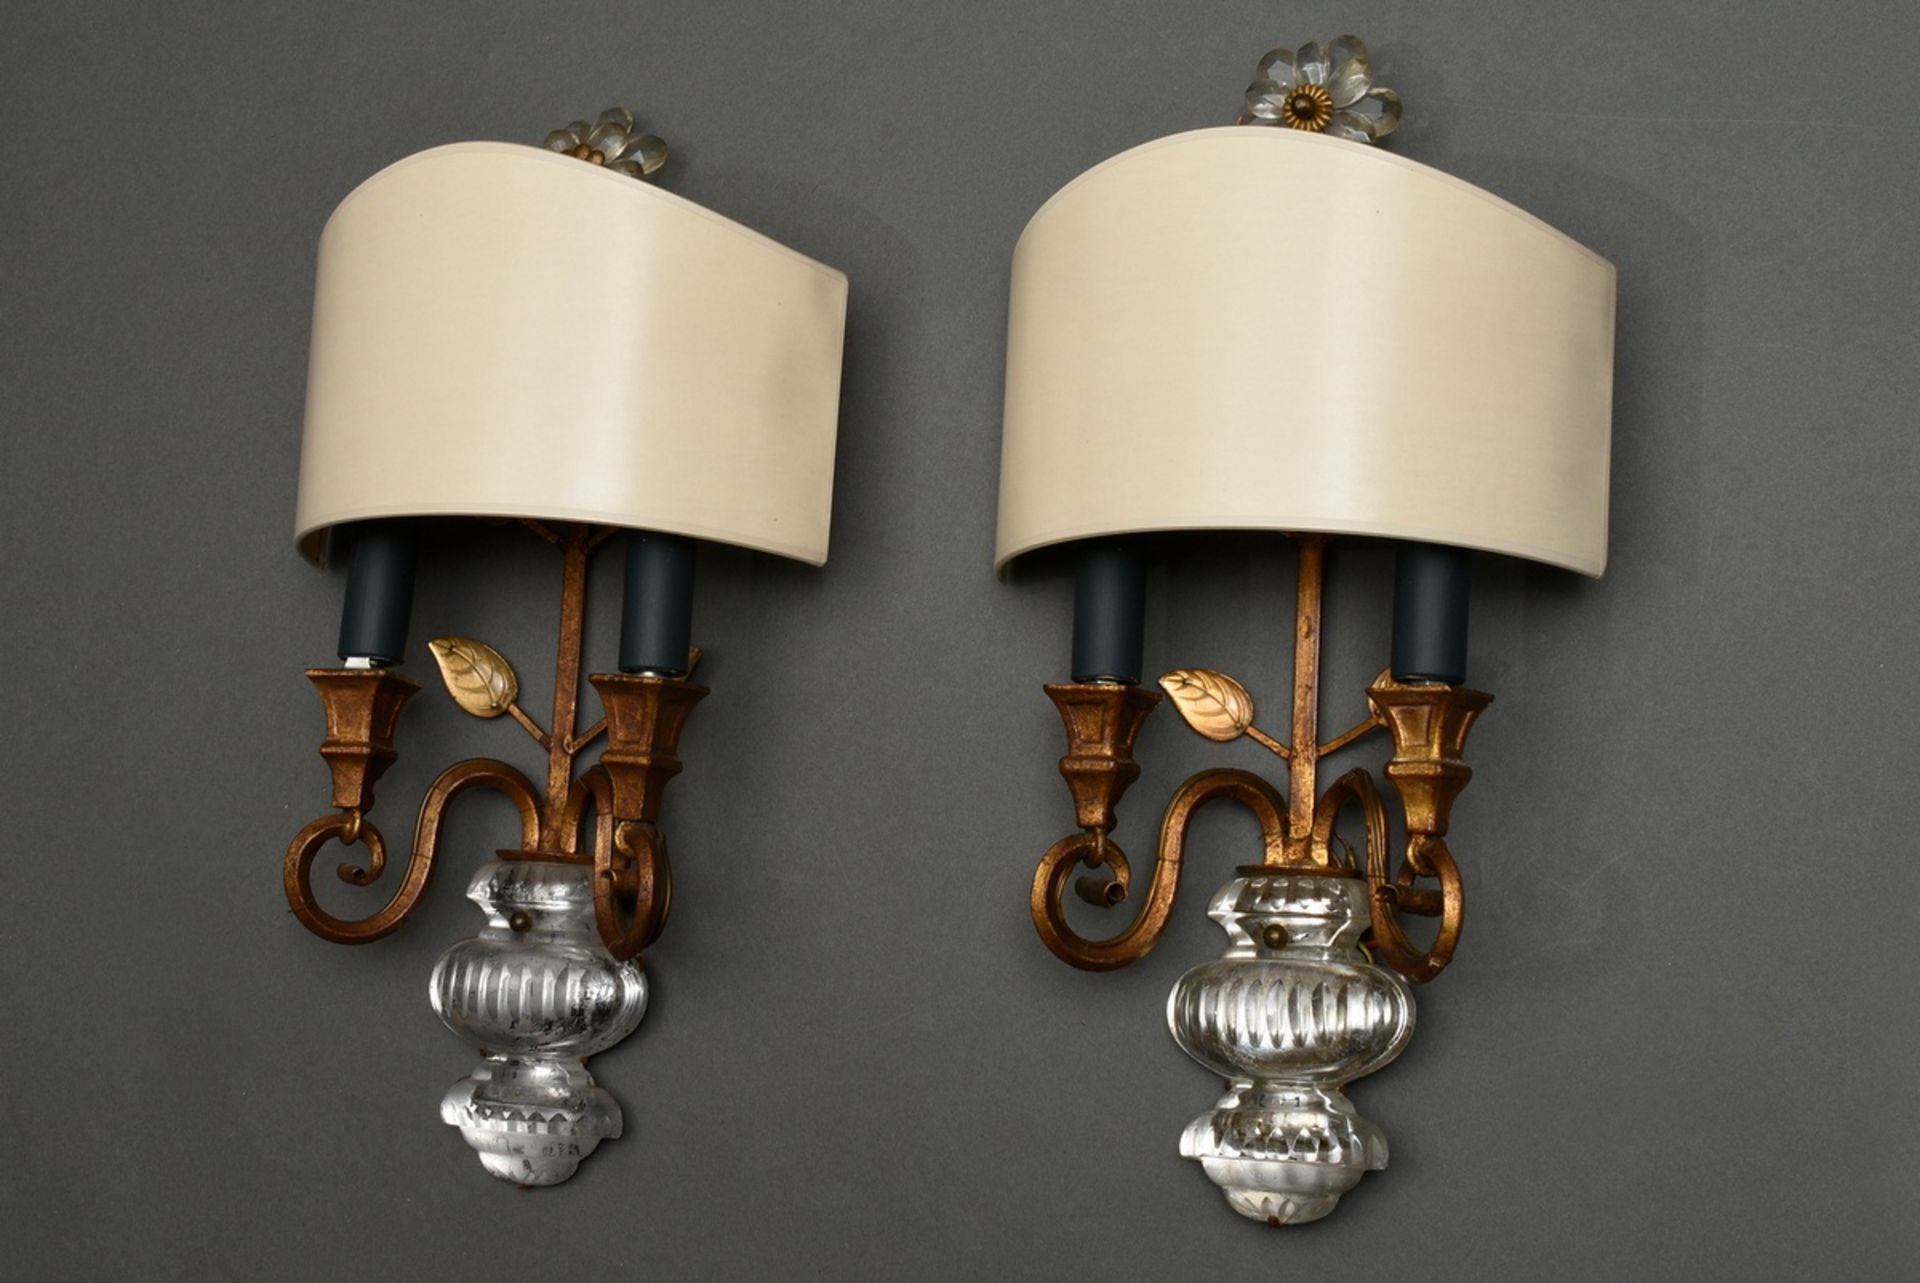 Pair of "Vases" wall lamps in Maison Baguès style, gilded metal with cut mirror glass and prismatic - Image 3 of 5